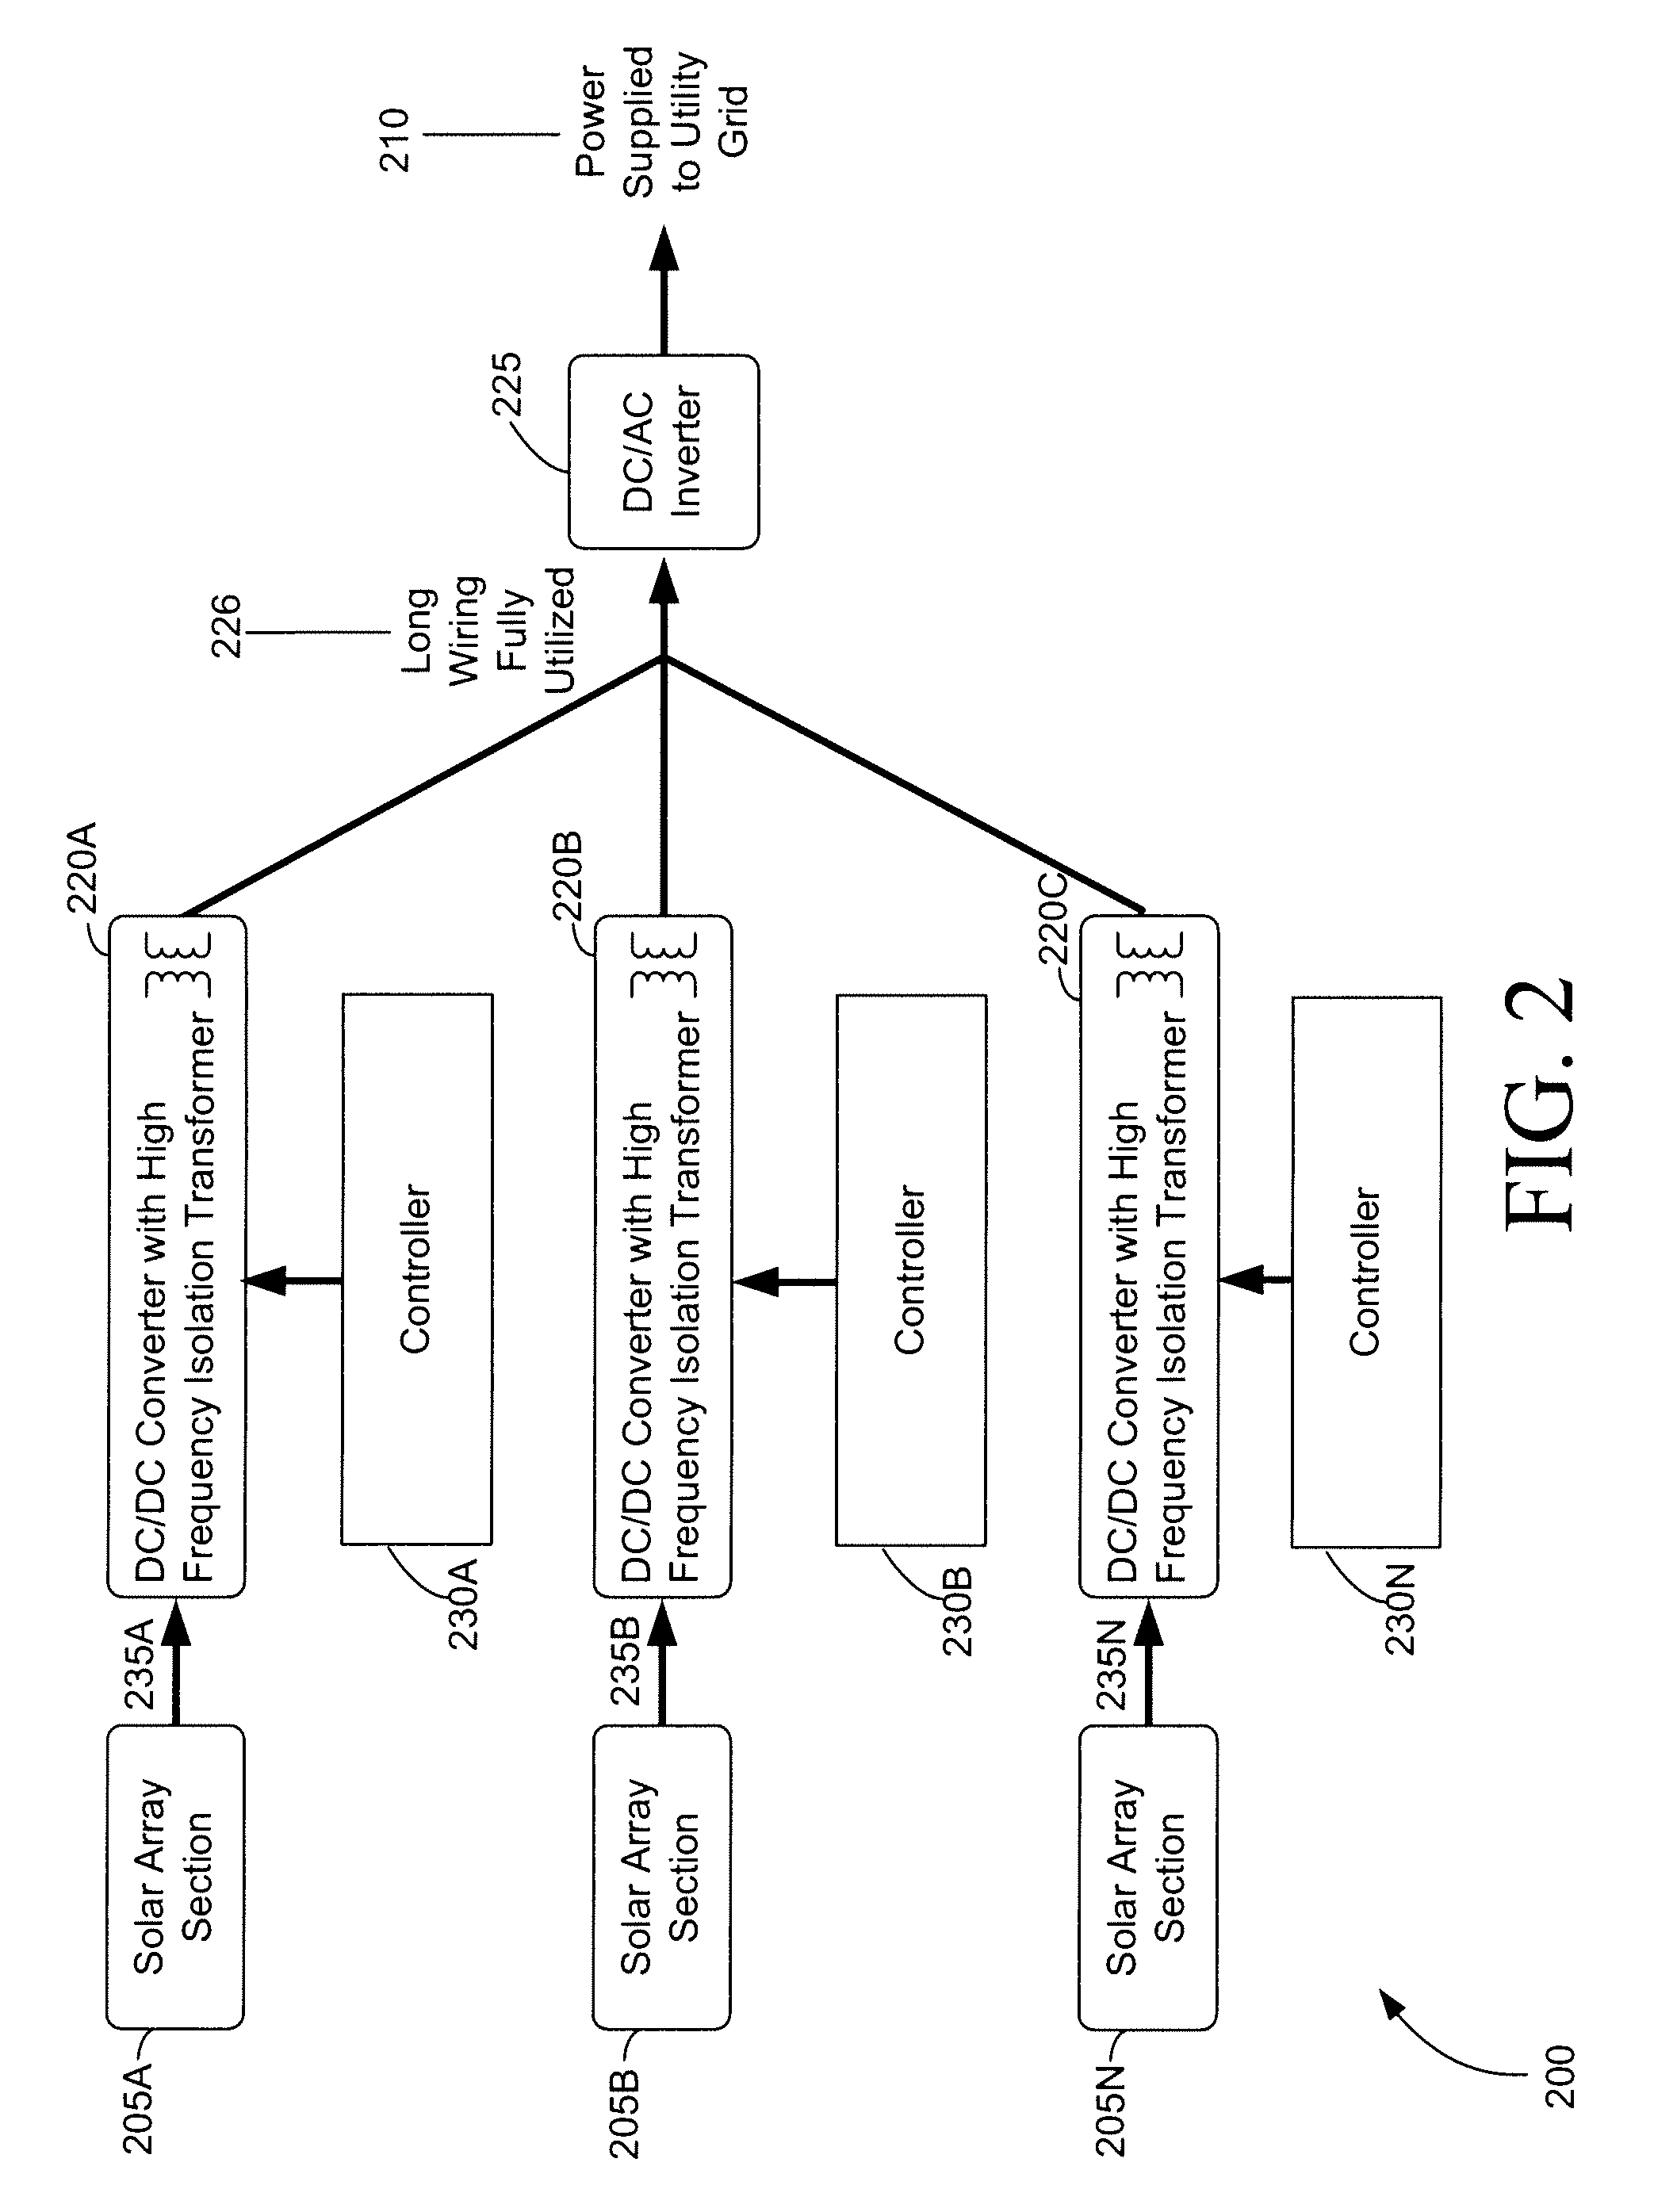 Systems, Methods, and Apparatus for Converting DC Power to AC Power